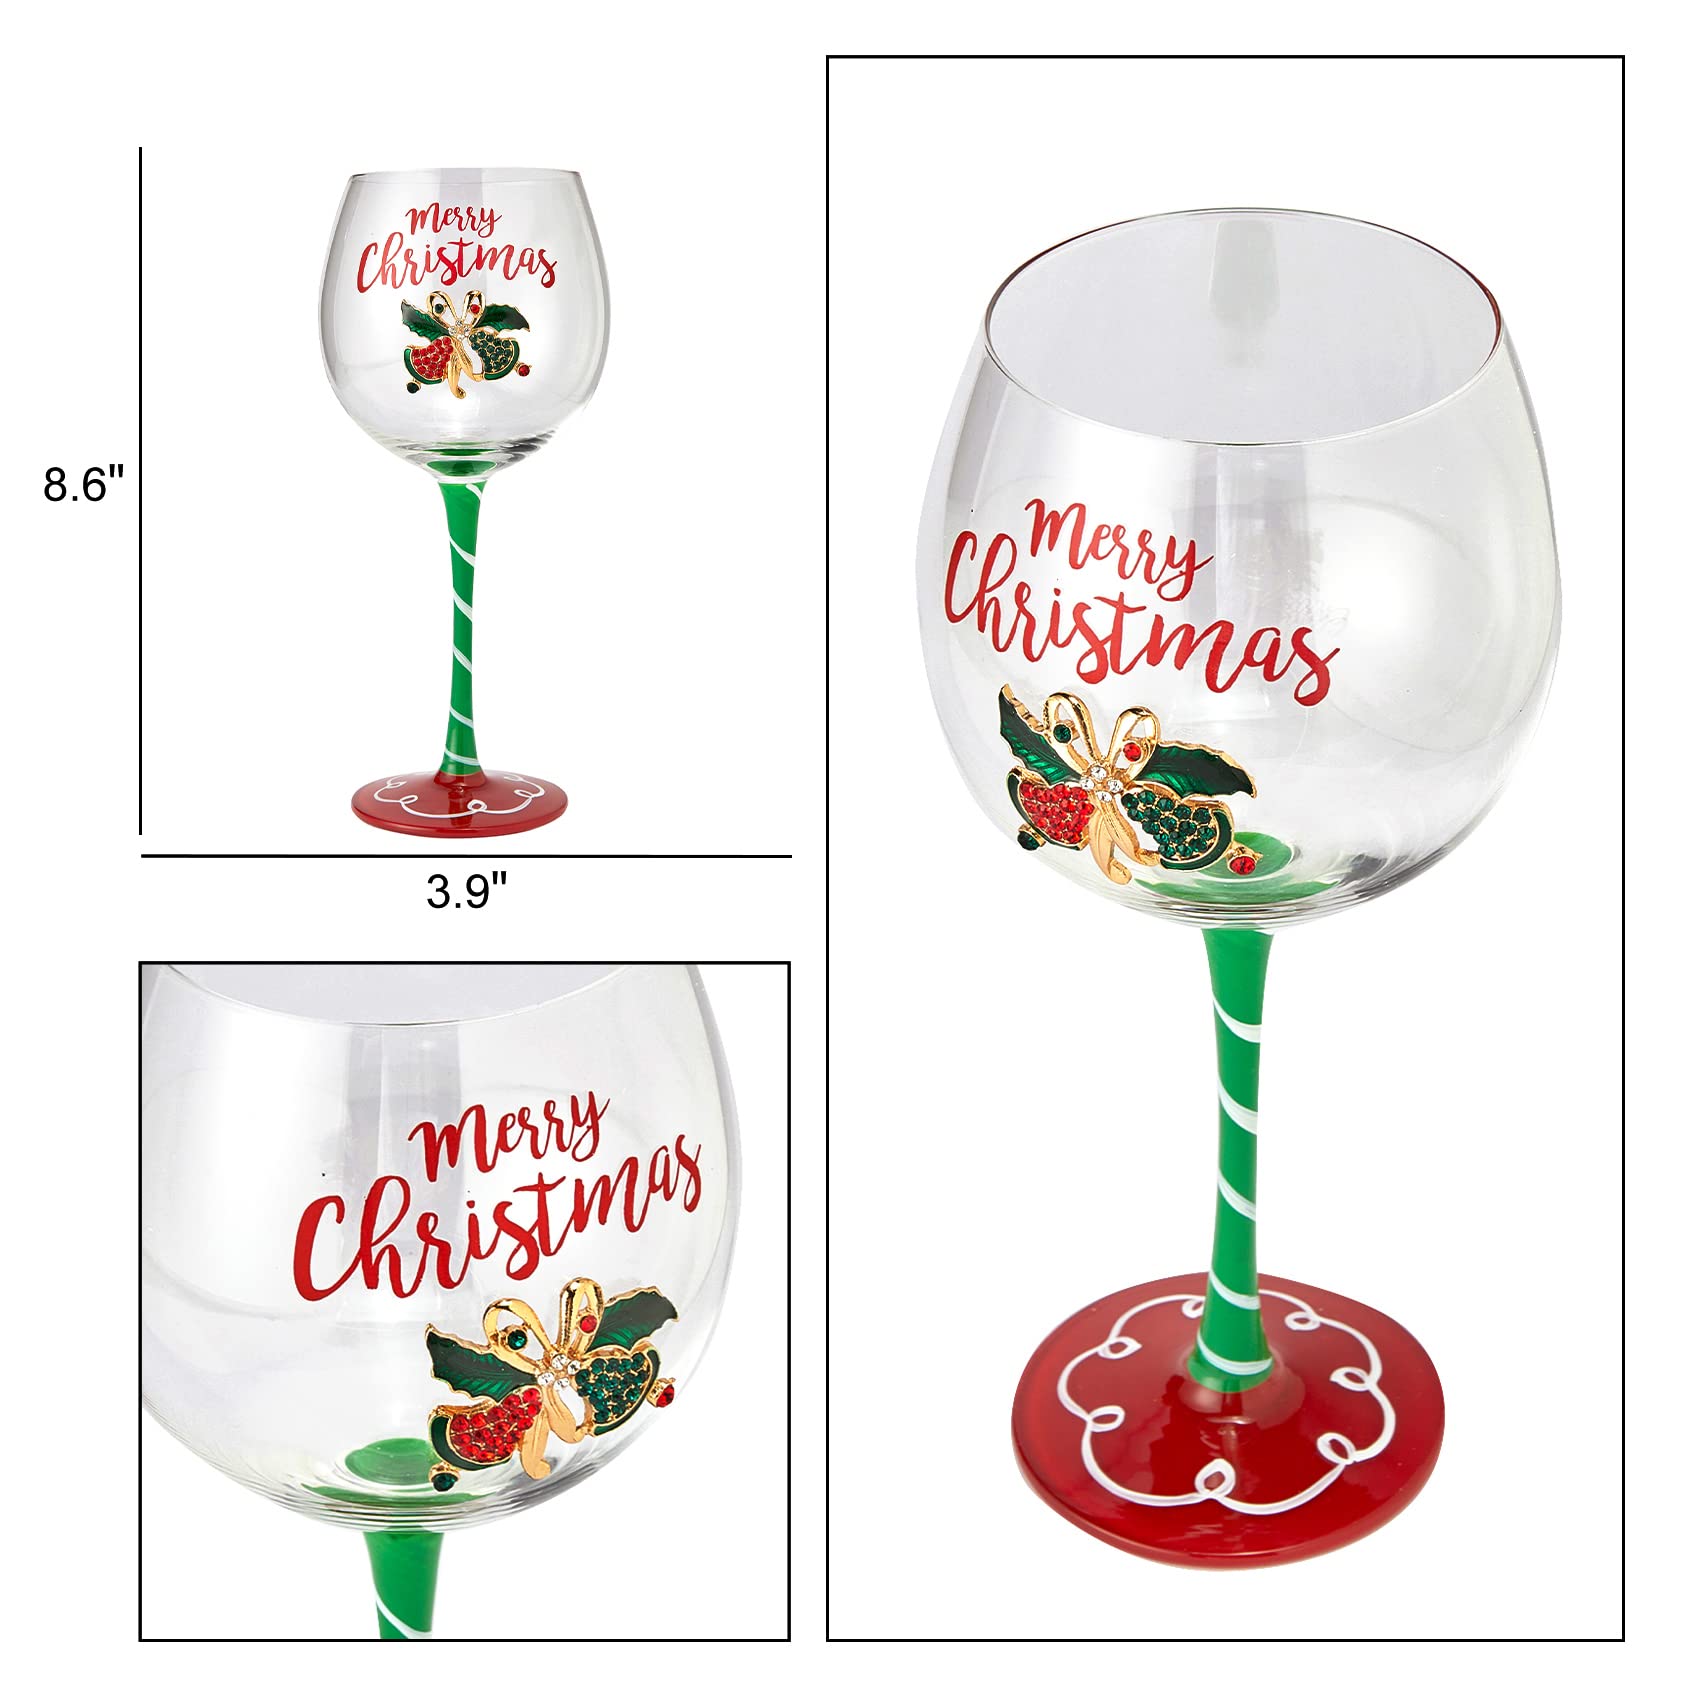 Crystal Christmas Bells Diamond Set of 2 Xmas Wine Wine & Water Glasses - Winterberry Glass Red Ribbon Holly Leaf & Berries Harmony Shining Red Green Yellow Silver, Perfect For Holiday Parties